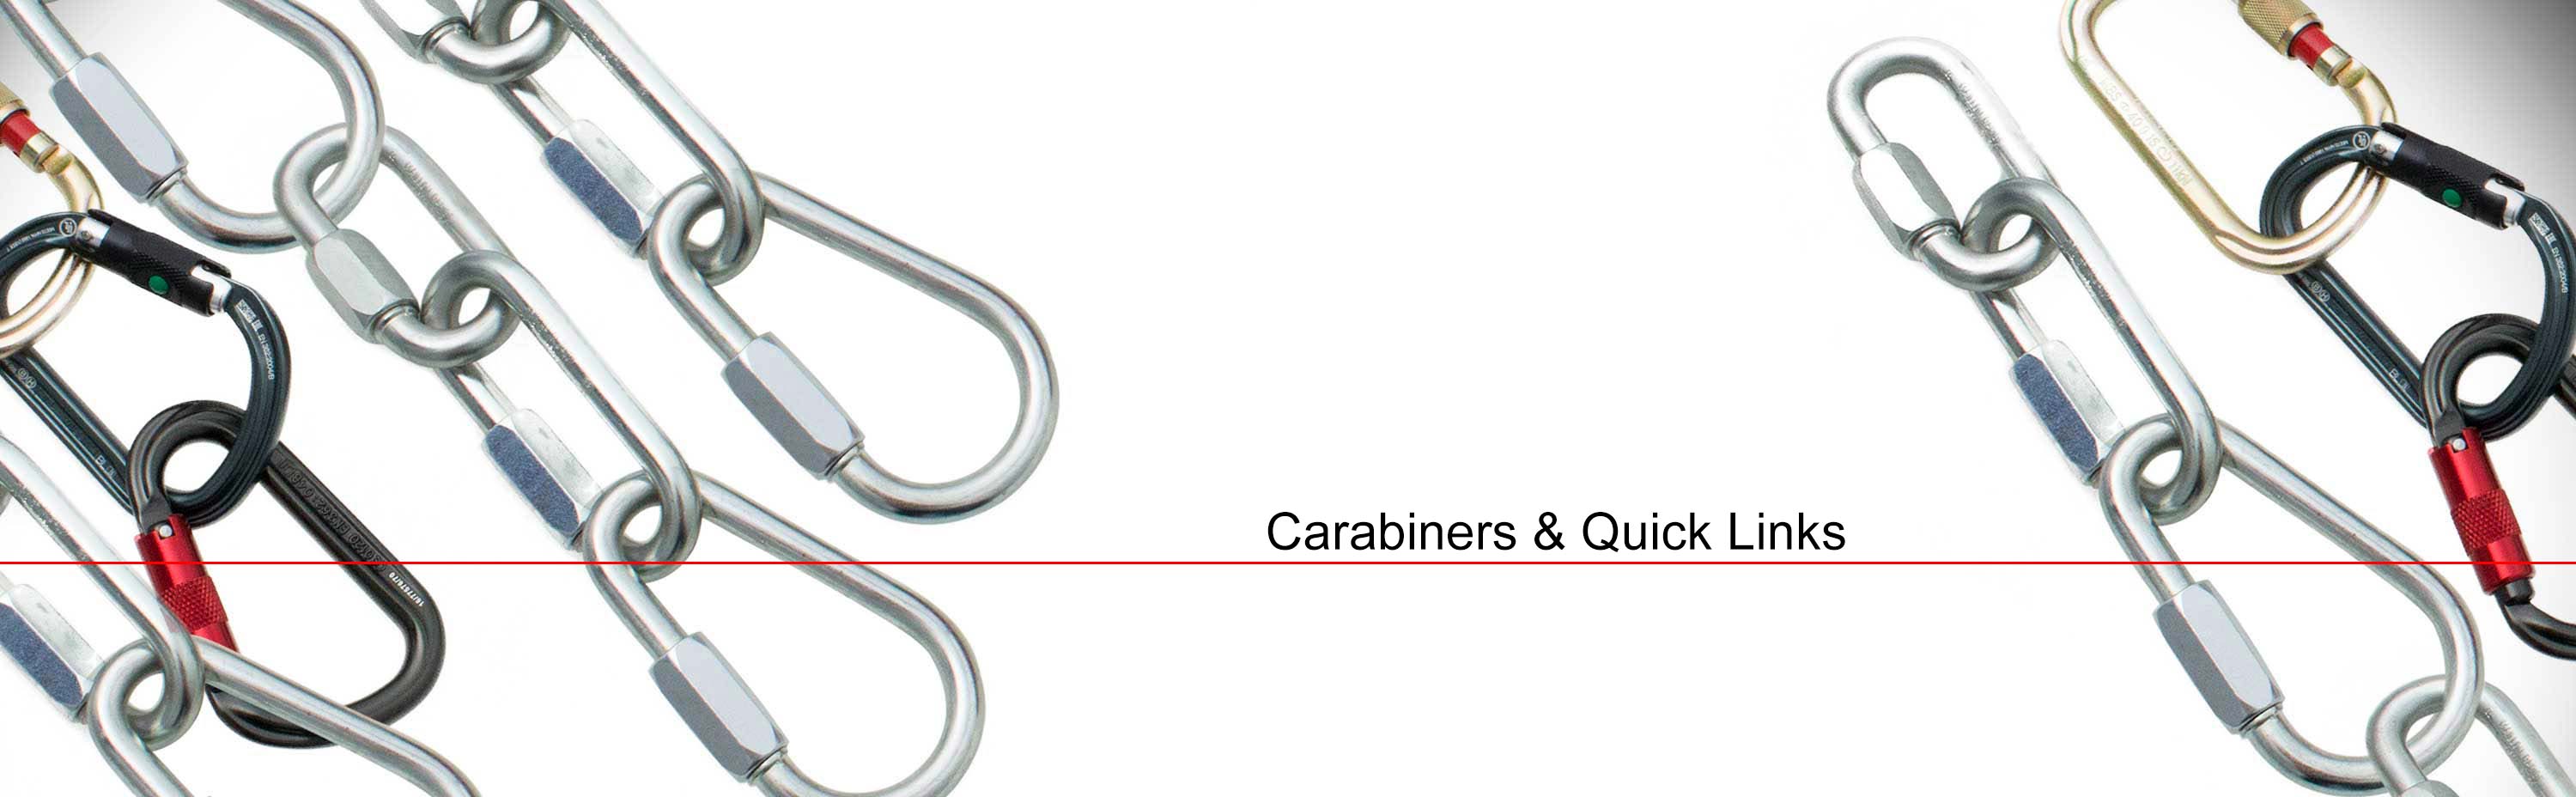 Carabiners and Quick Links